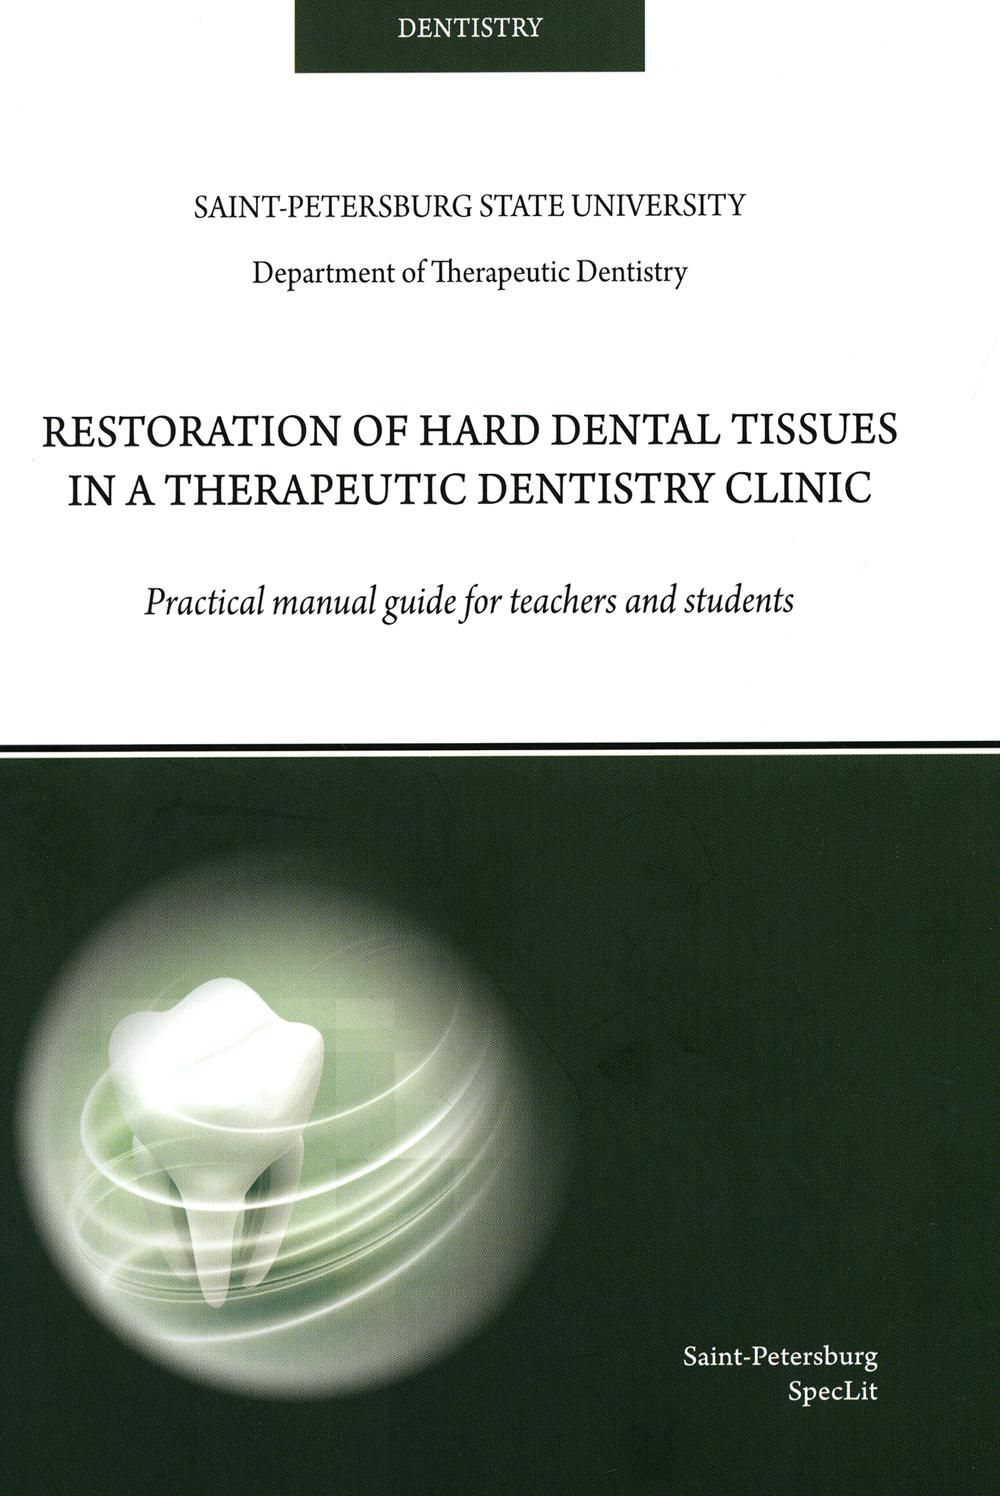 Restoration of hard dental tissues in a therapeutic dentistry clinic:  .